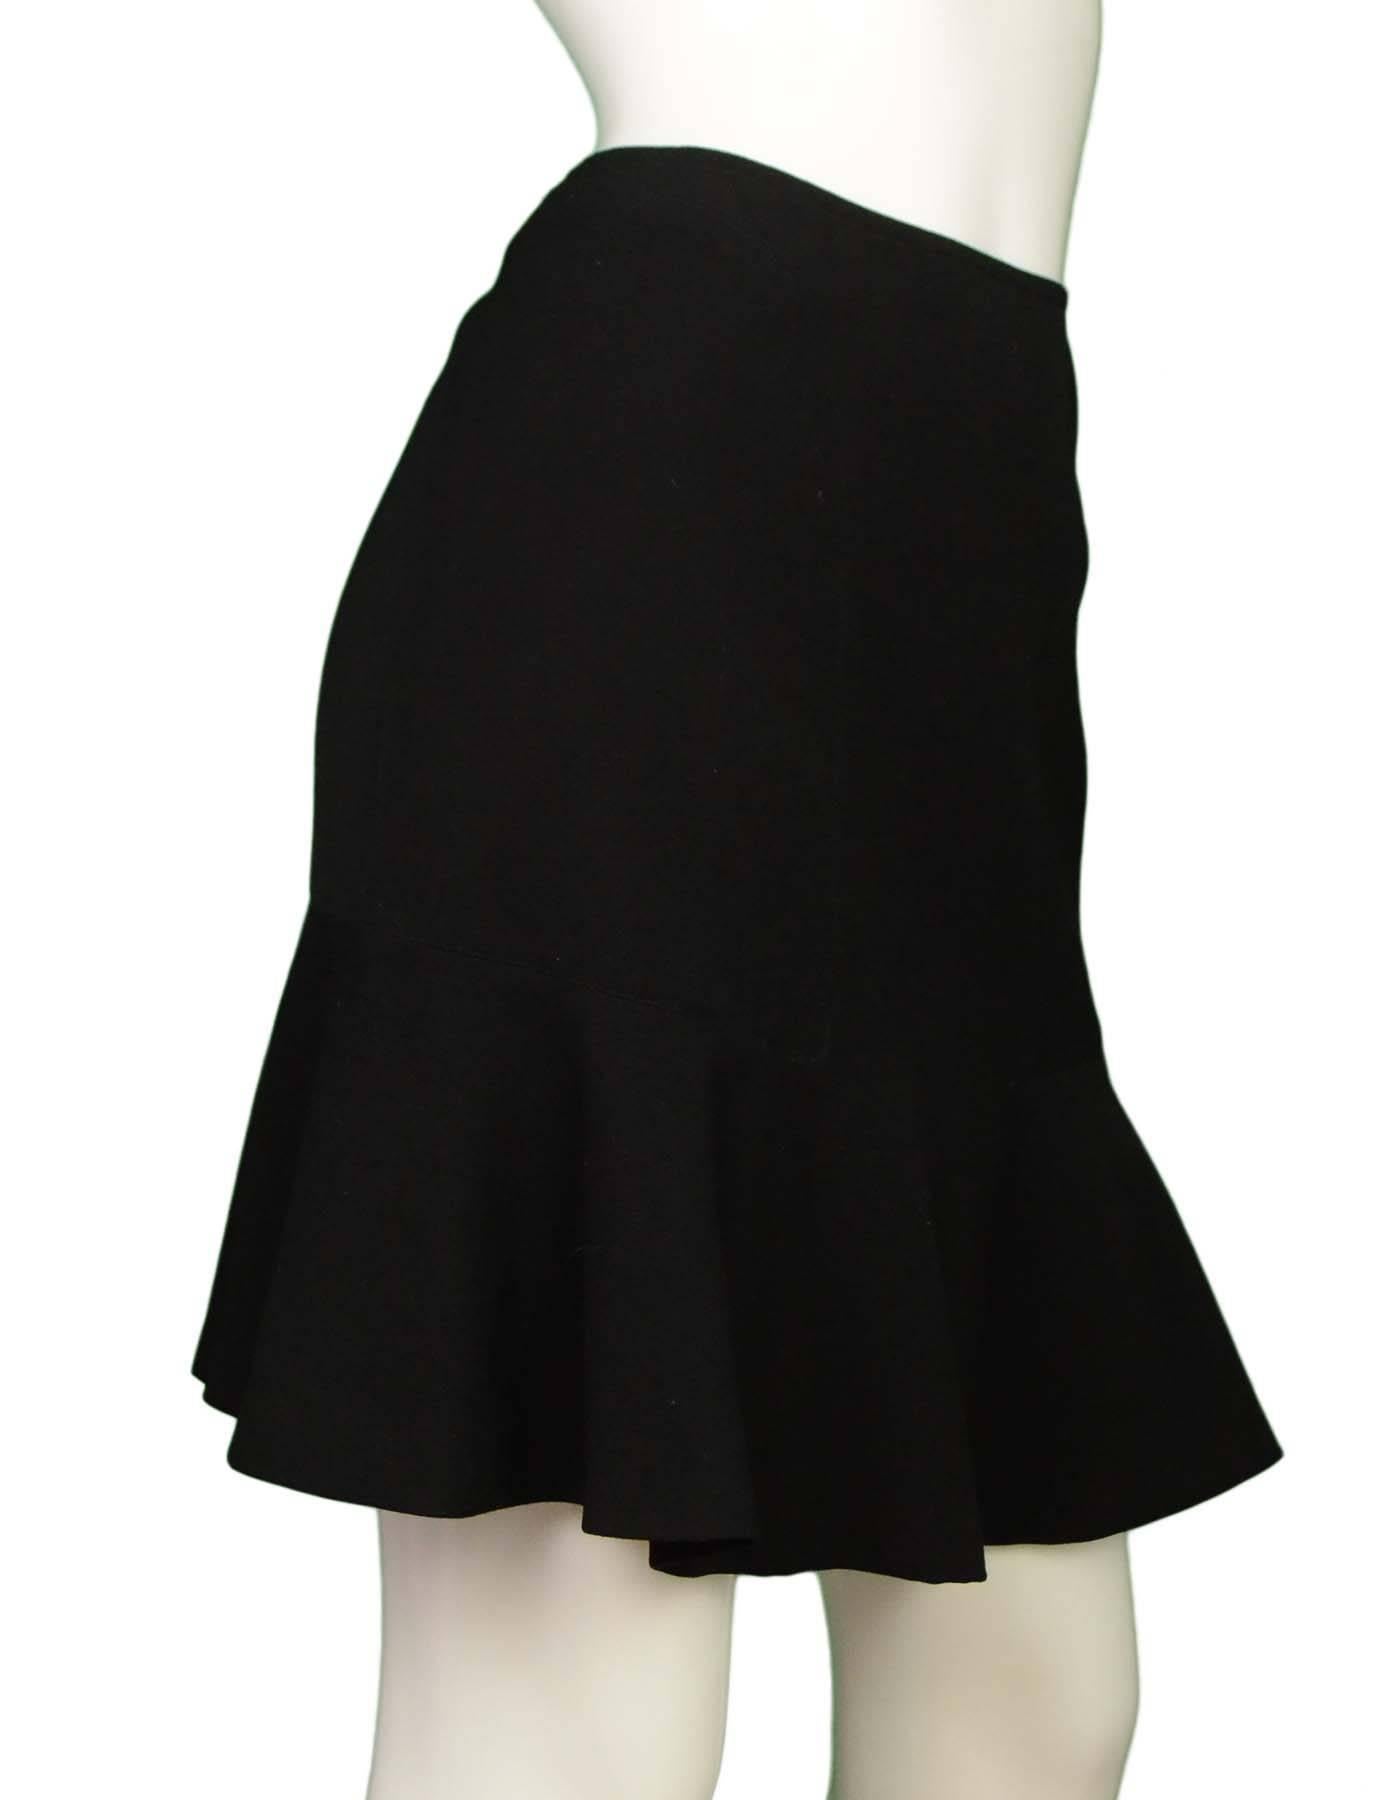 Alaia Black Wool Skirt Sz 44

Made In: France
Color: Black
Composition: 100% Wool
Lining: Black, 100% polyester
Closure/Opening: Hidden side zip closure
Exterior Pockets: None
Interior Pockets: None
Overall Condition: Excellent pre-owned